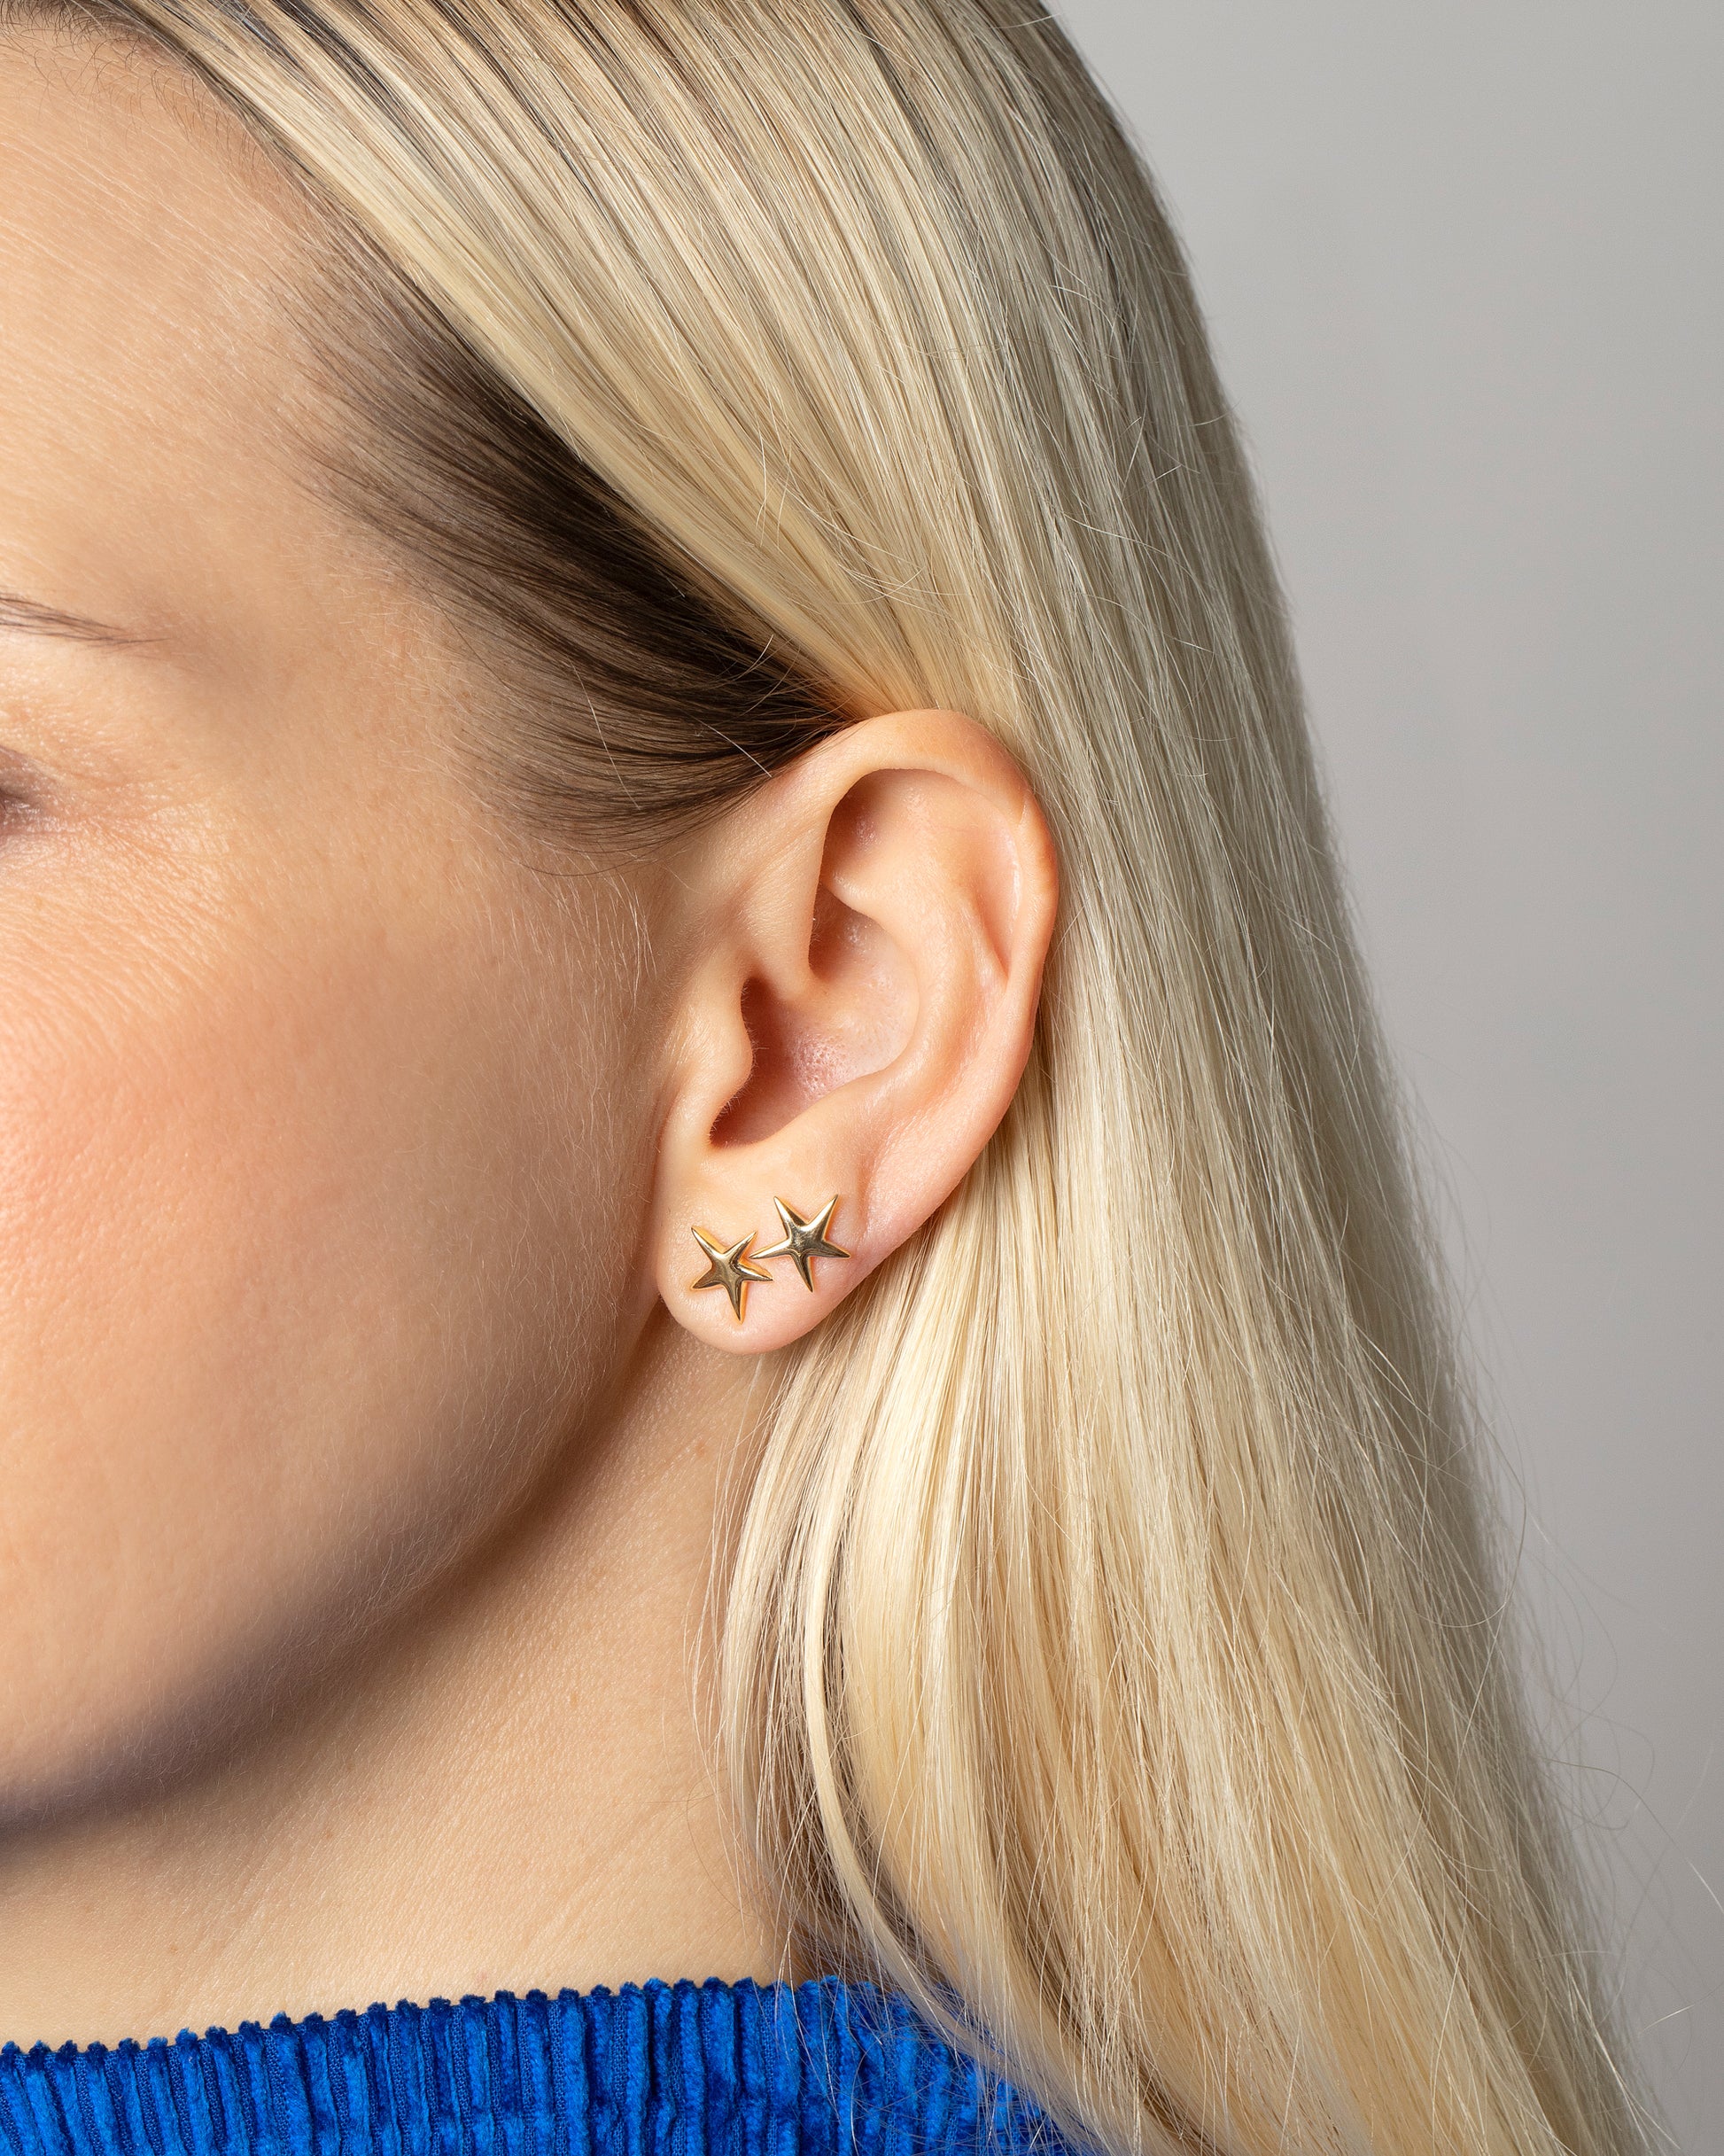 Editorial photo of model wearing the Verve Five Point Star Stud Earrings - Small.